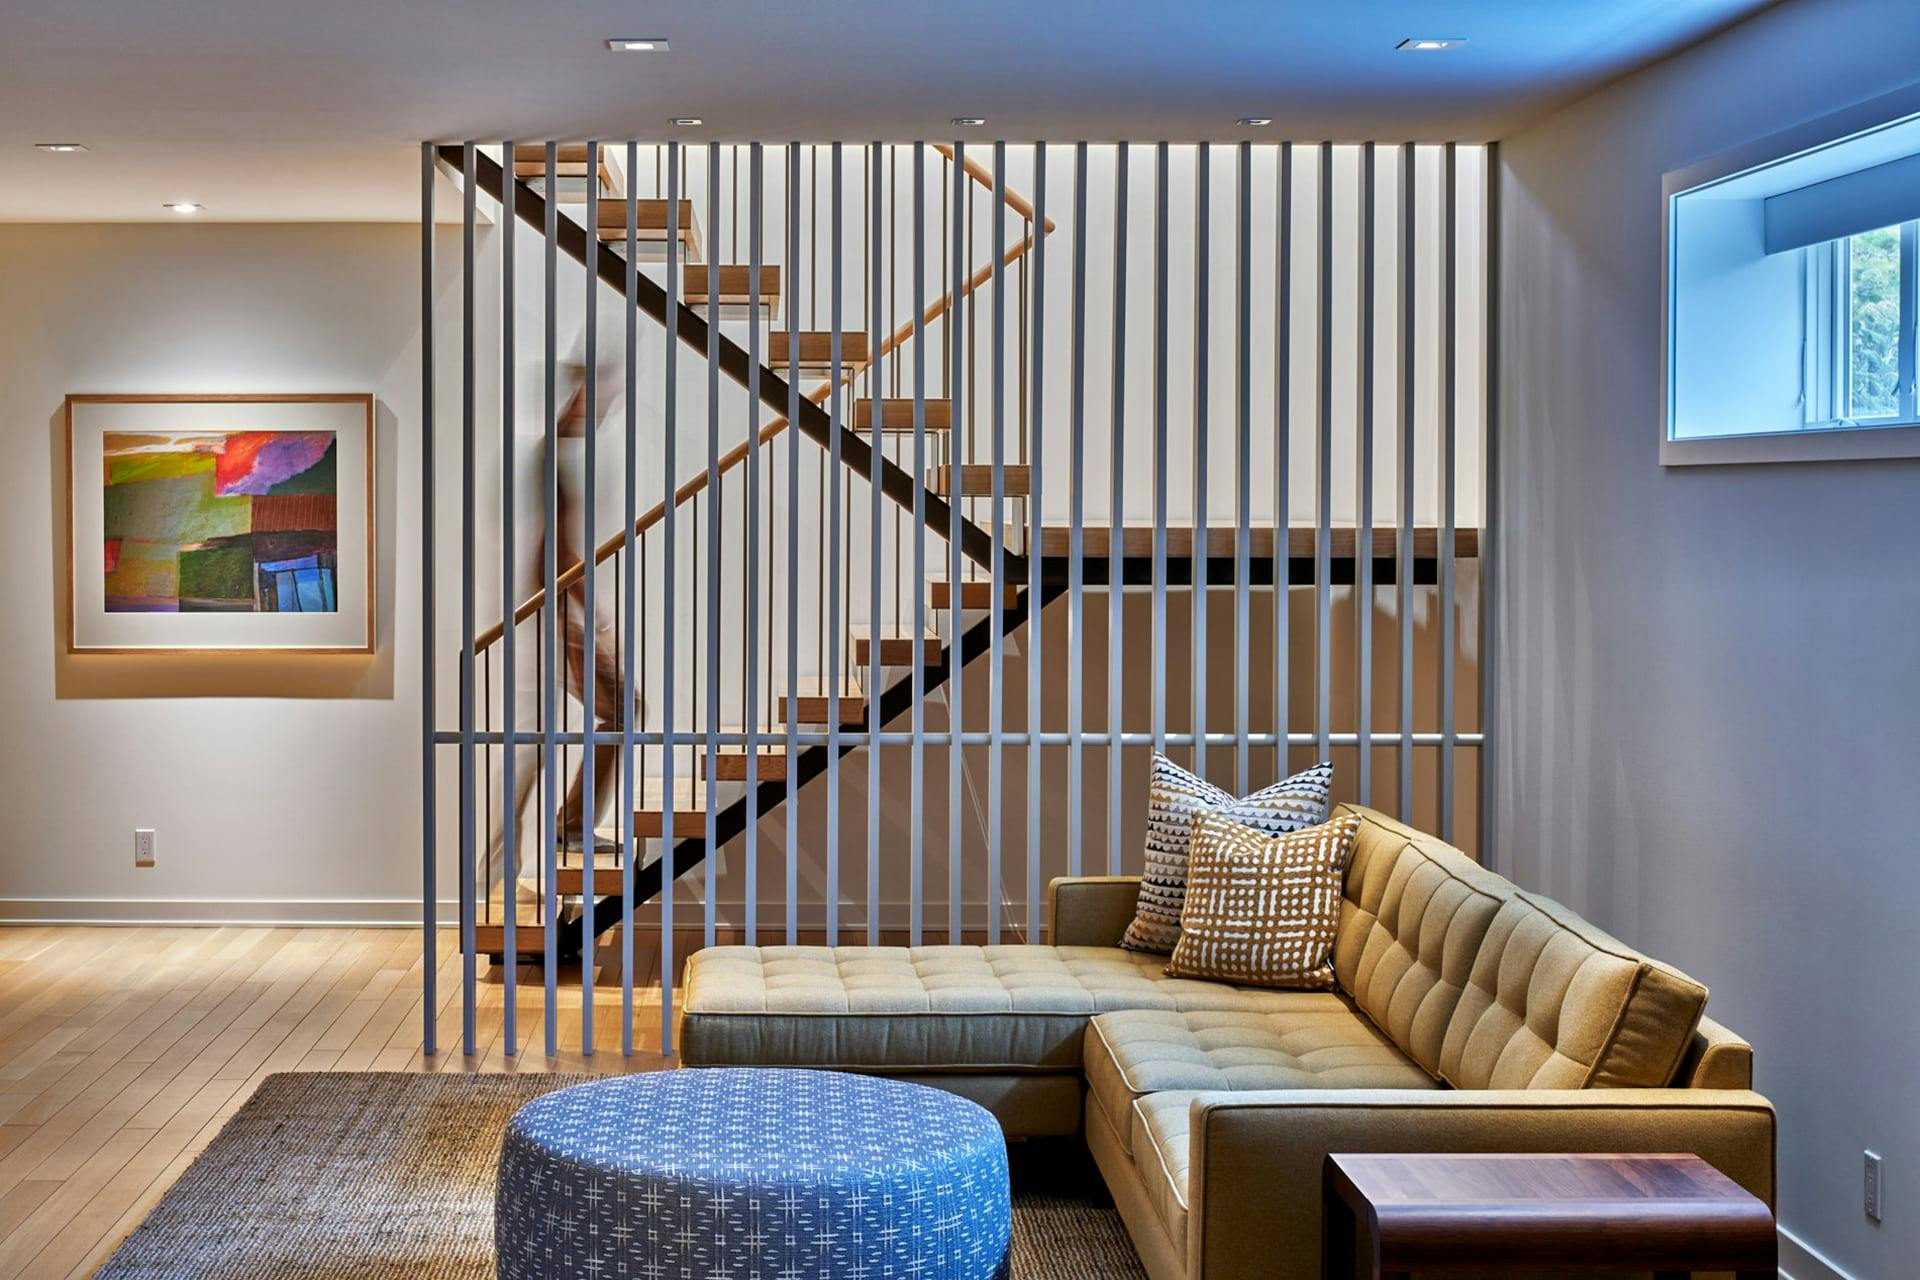 Watermark open staircase and slat wall